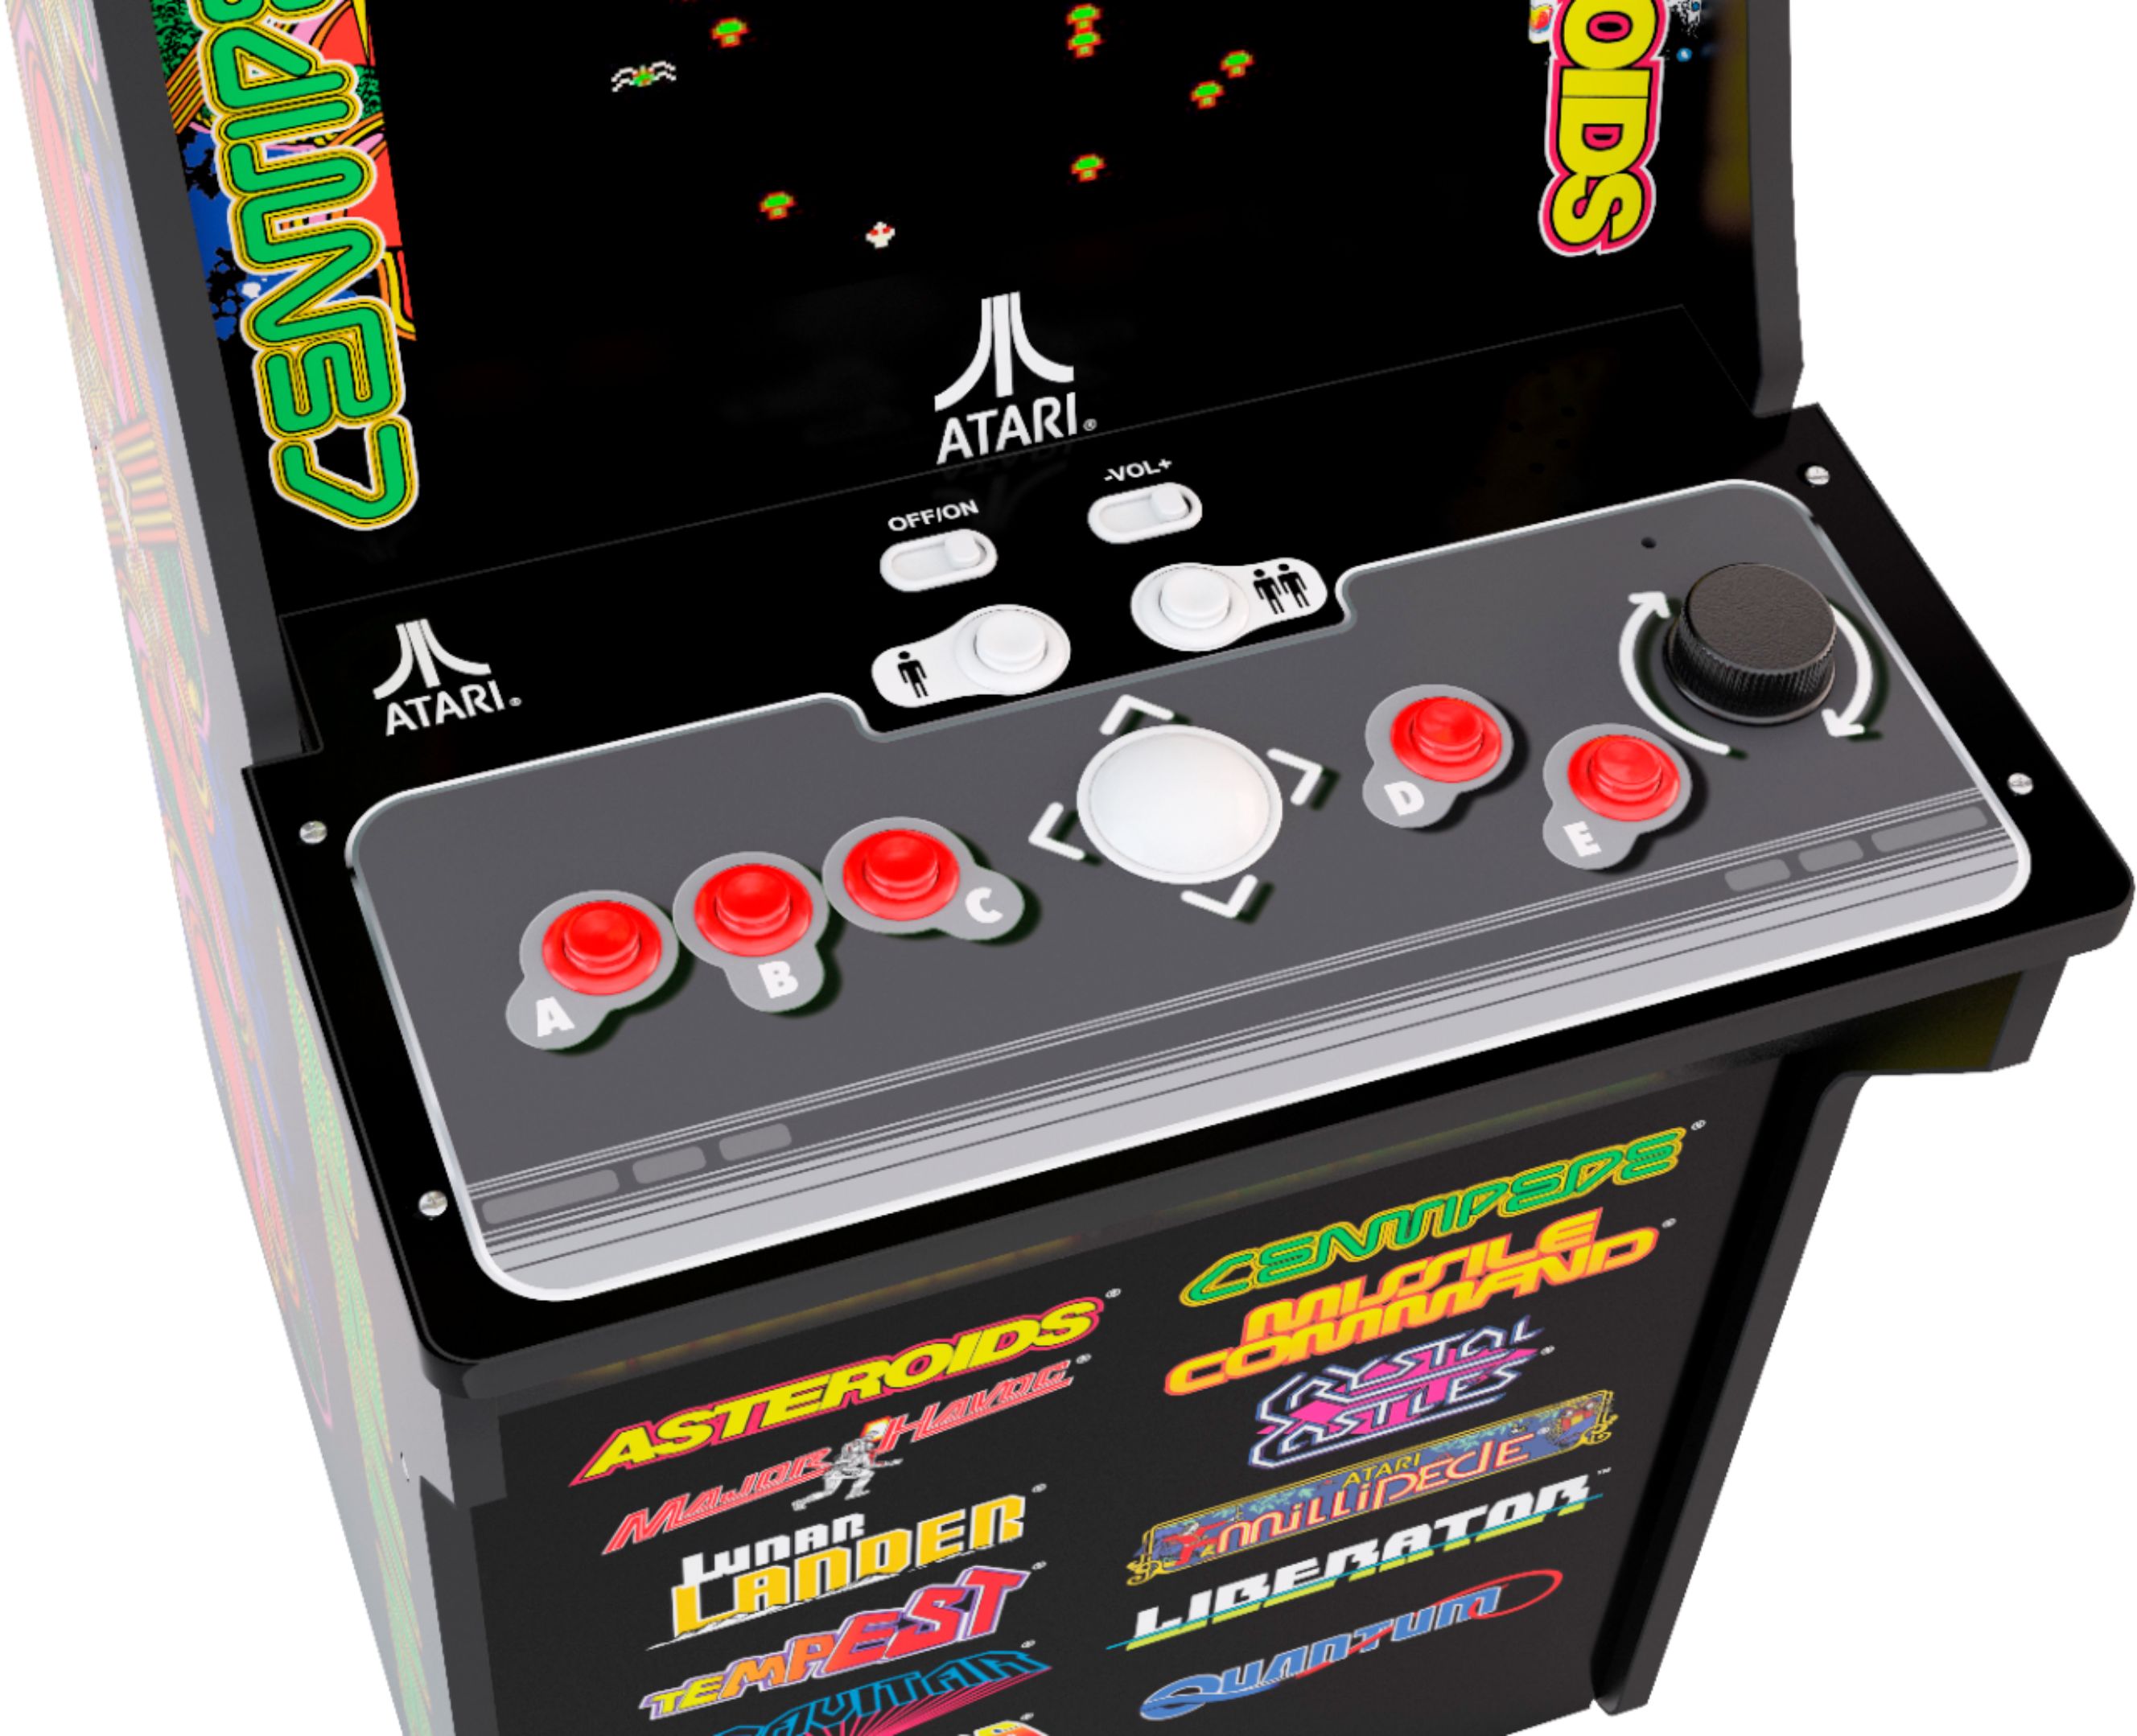 Arcade1Up The Fast & The Furious Deluxe Arcade Game Black FAF-A-300211 -  Best Buy